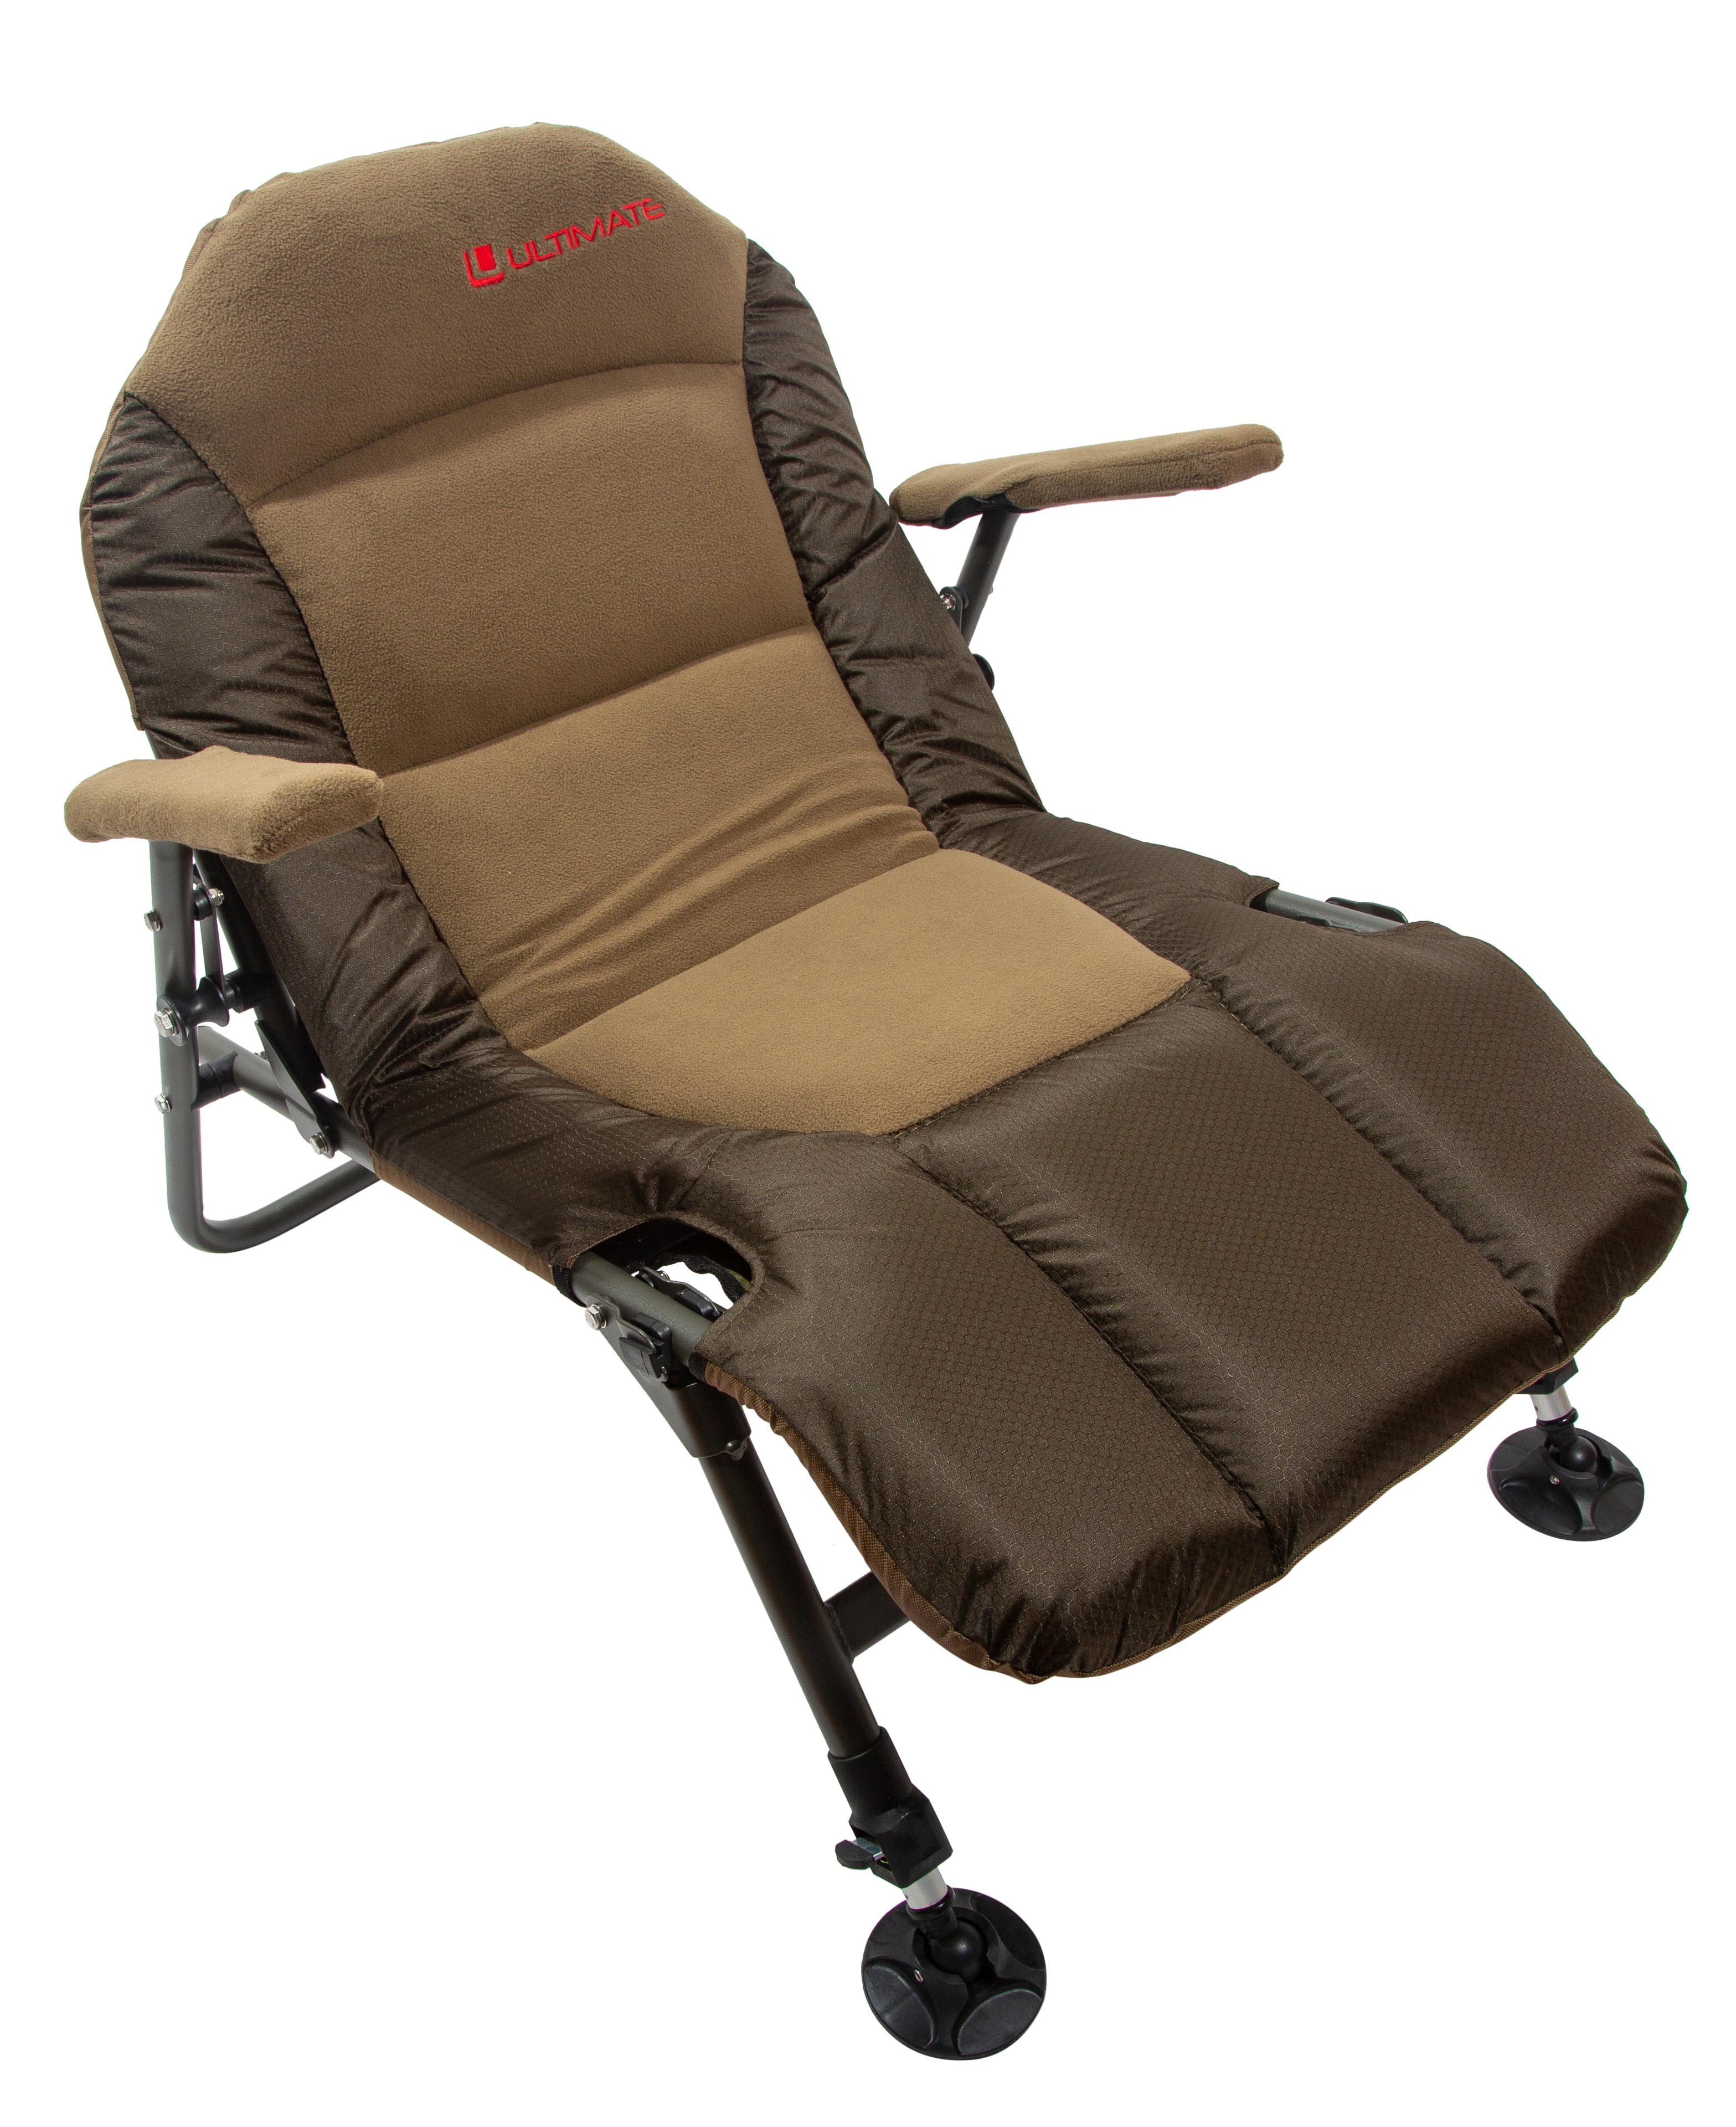 Sdraio Ultimate Lounger